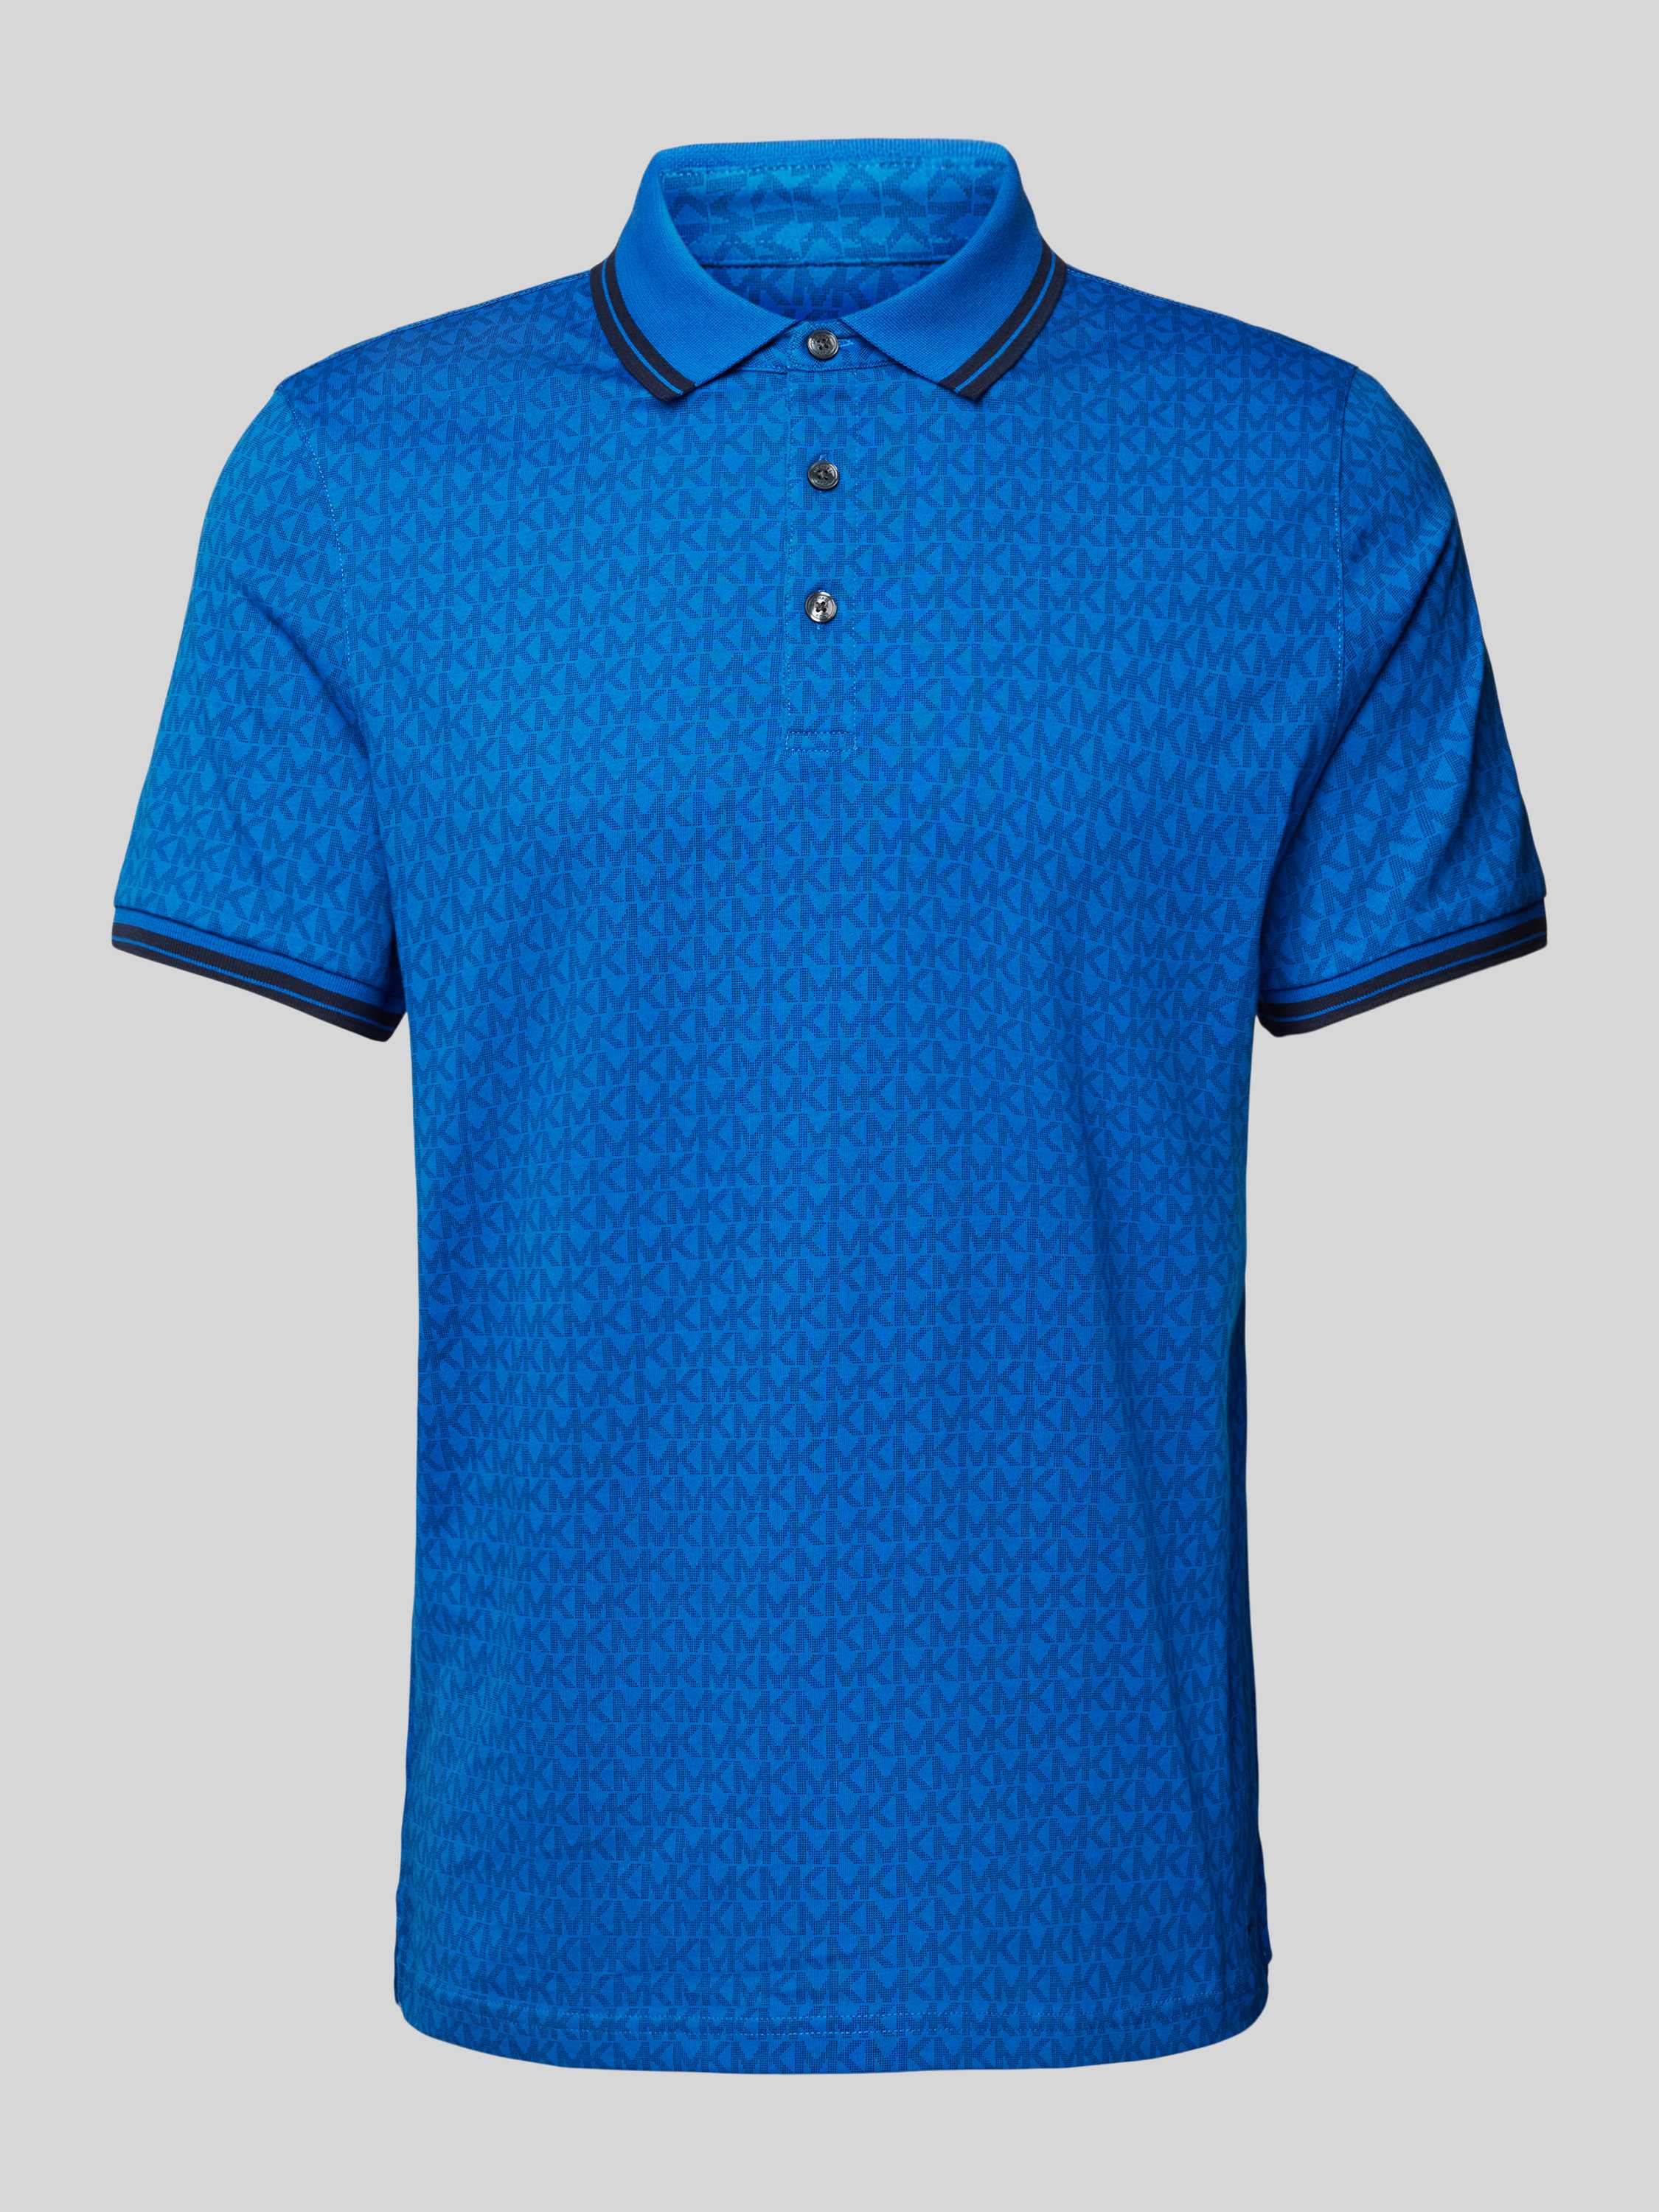 Regular Fit Poloshirt mit Allover-Label-Muster Modell 'GREENWICH'